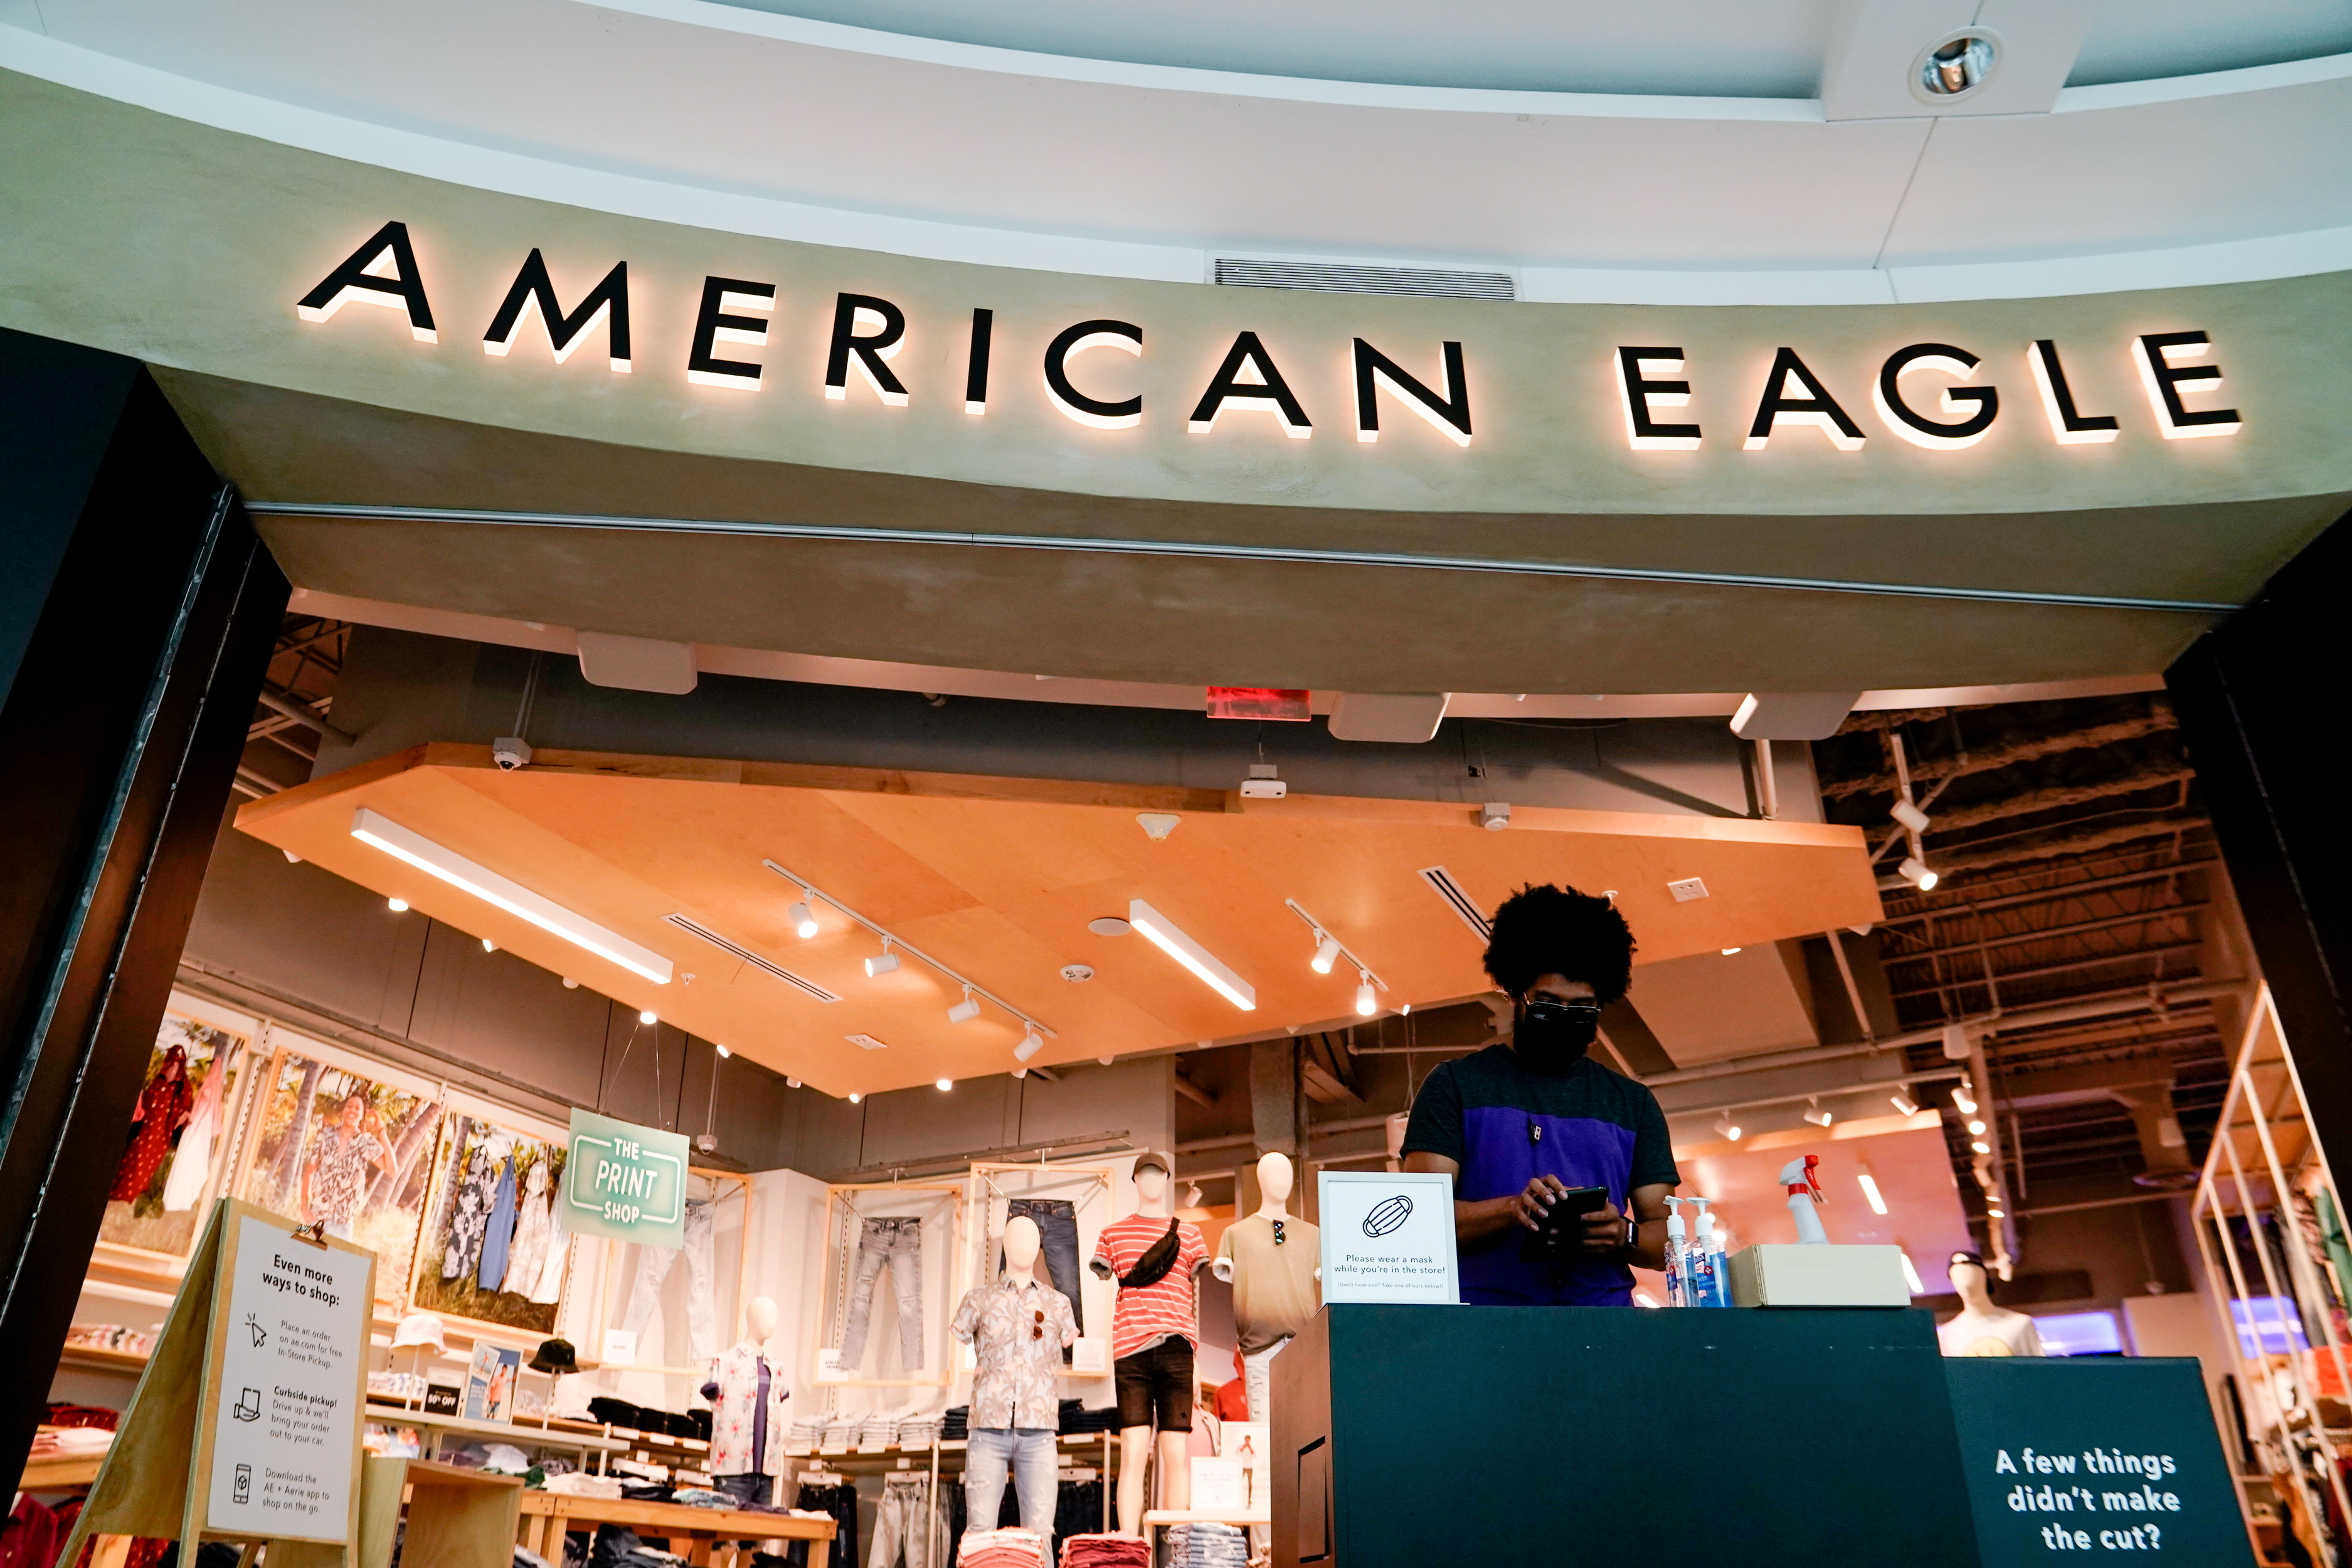 American Eagle Outfitters Revenues: Where's The Growth?